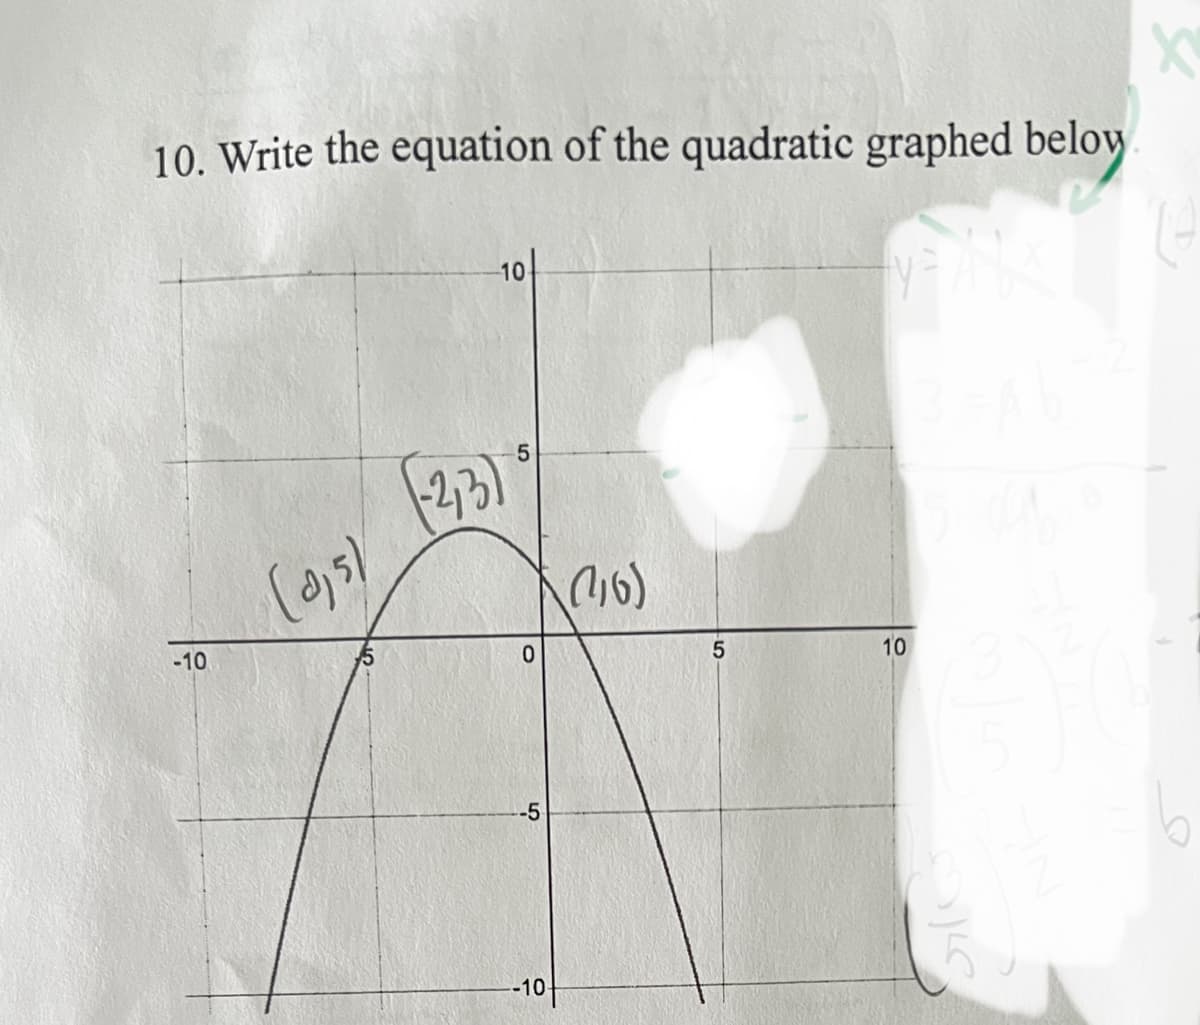 ### Quadratic Equations: Graph Analysis

**Question:**
10. Write the equation of the quadratic graphed below.

**Graph Description:**
The graph presented is of a quadratic equation that forms a parabola opening downwards. It depicts several key points:

- The vertex of the parabola is at \((-2, 9)\).
- The y-intercept is \((0, 5)\).
- Another point shown on the parabola is \((2, 5)\).

**Steps to Determine the Equation:**

1. **Identify the Vertex Form of a Quadratic Equation:**
   The vertex form of a quadratic equation is given by:
   \[
   y = a(x-h)^2 + k
   \]
   where \((h, k)\) is the vertex of the parabola.

2. **Substitute the Vertex Coordinates:**
   For the given vertex \((-2, 9)\):
   \[
   y = a(x + 2)^2 + 9
   \]

3. **Use Another Point to Find 'a':**
   Substitute the point \((0, 5)\) into the equation to solve for \(a\):
   \[
   5 = a(0 + 2)^2 + 9
   \]
   This simplifies to:
   \[
   5 = 4a + 9
   \]
   Solving for \(a\):
   \[
   4a = 5 - 9
   \]
   \[
   4a = -4
   \]
   \[
   a = -1
   \]

4. **Write the Final Equation:**
   Substitute \(a = -1\) into the vertex form equation:
   \[
   y = - (x + 2)^2 + 9
   \]

Hence, the equation of the quadratic graph is:
\[
y = - (x + 2)^2 + 9
\]